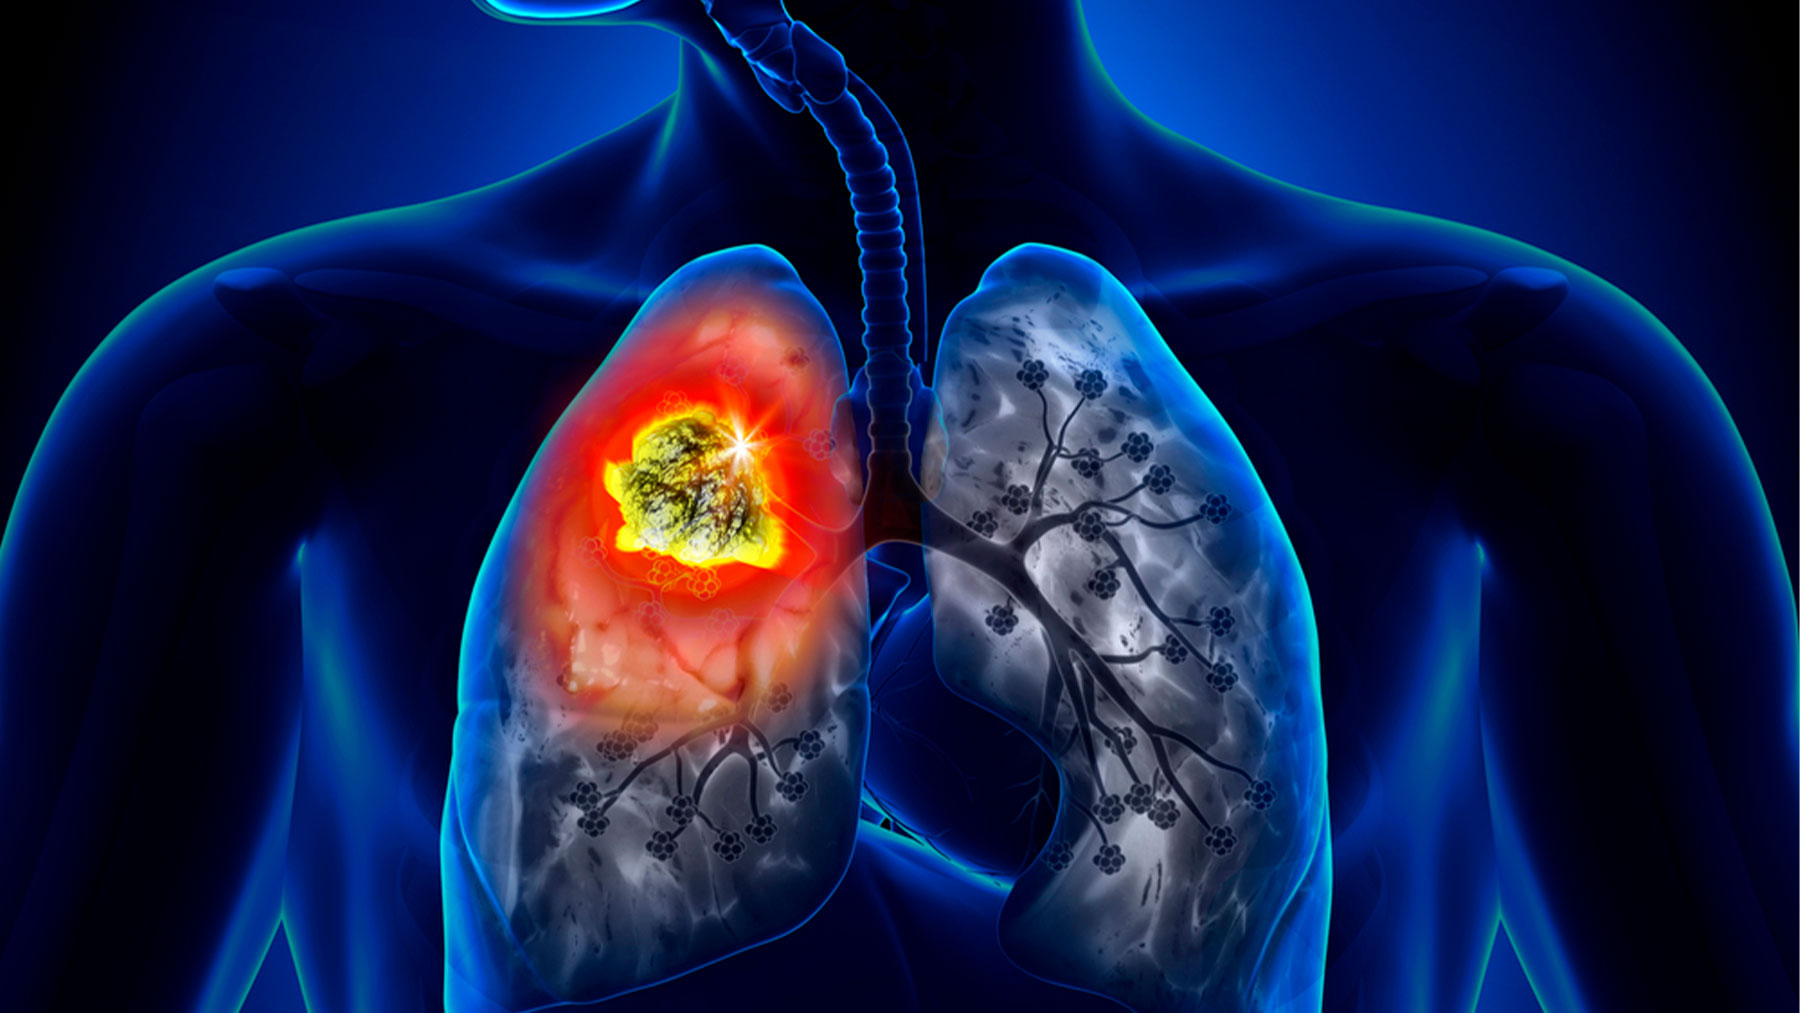 Europe approves treatment for early-stage non-small cell lung cancer